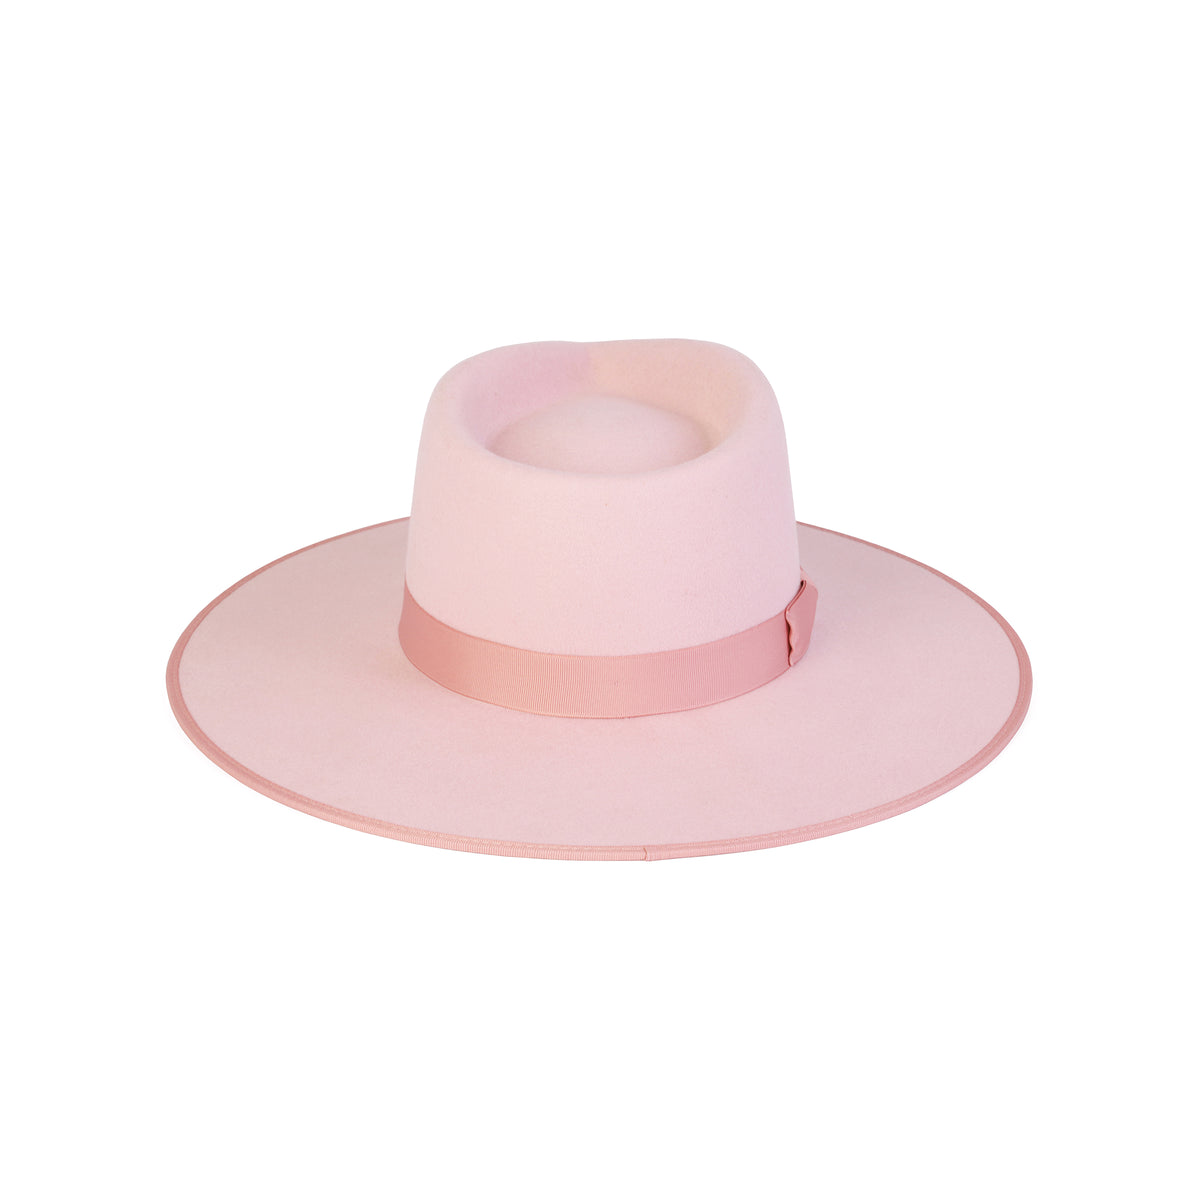 Stardust Rancher - Wool Felt Rancher Hat in Pink | Lack of Color US